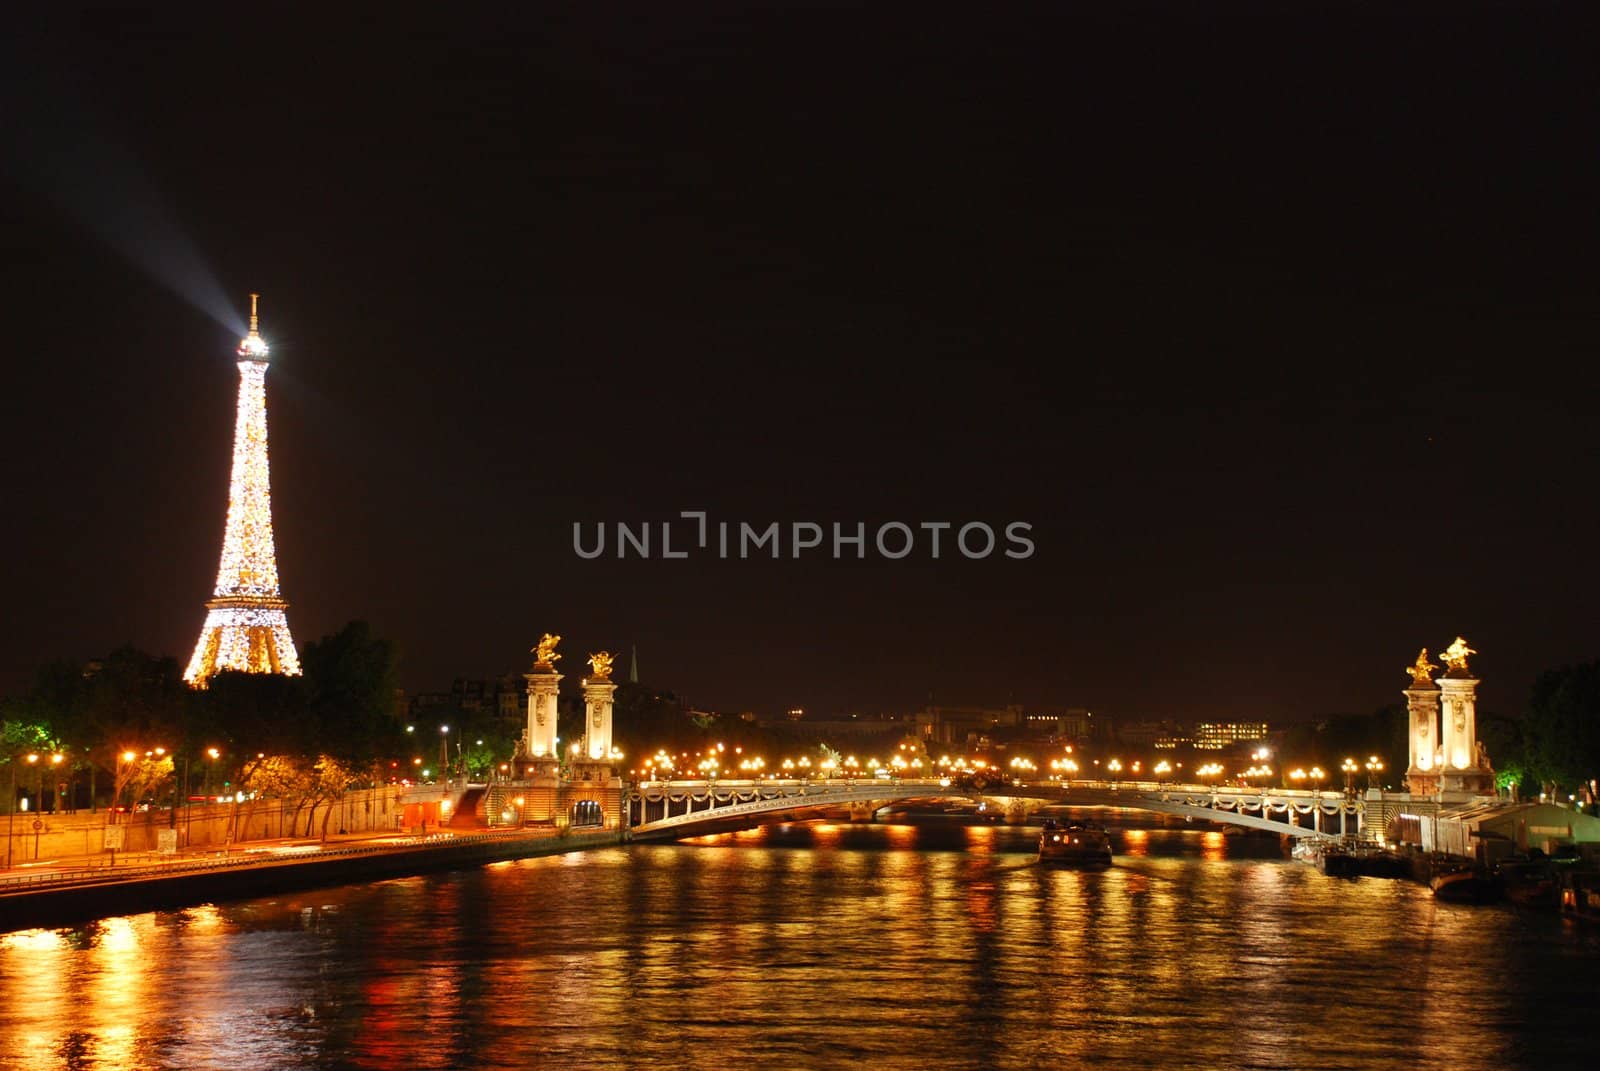 Majestic view of Paris, France at night